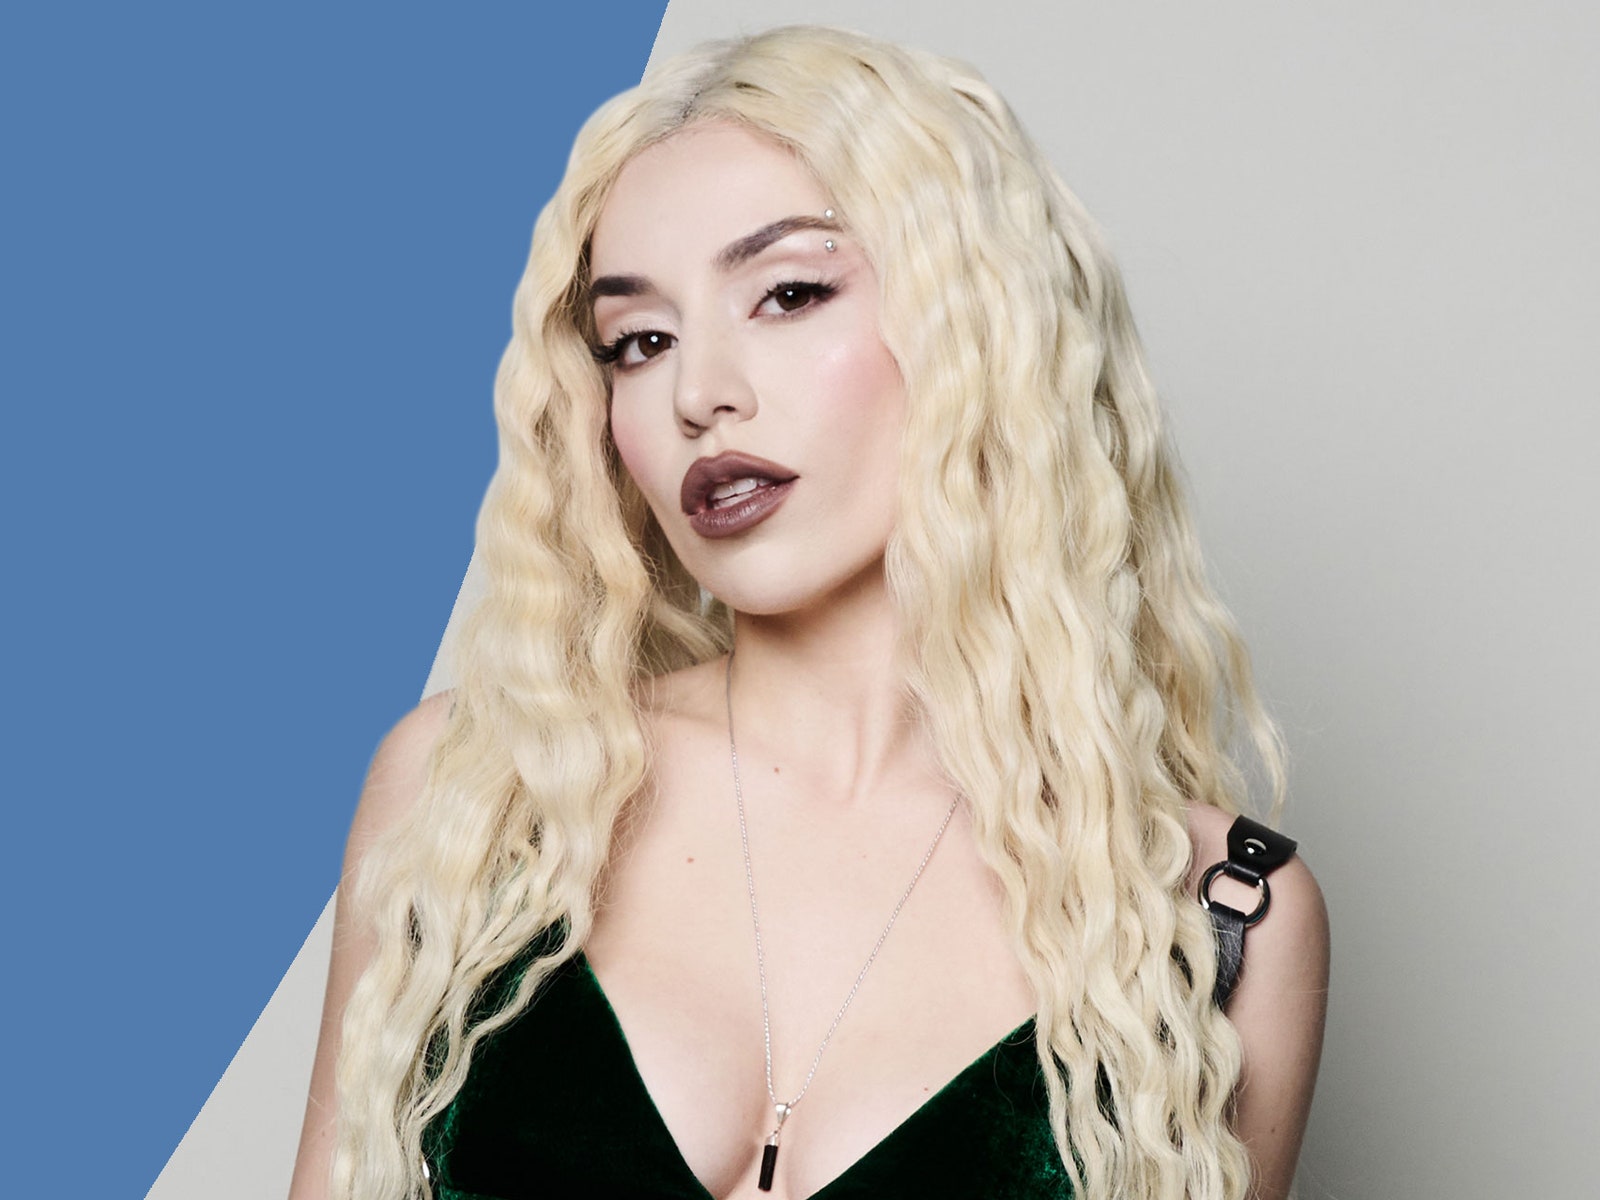 Ava Max is the latest pop star to be assaulted on stage